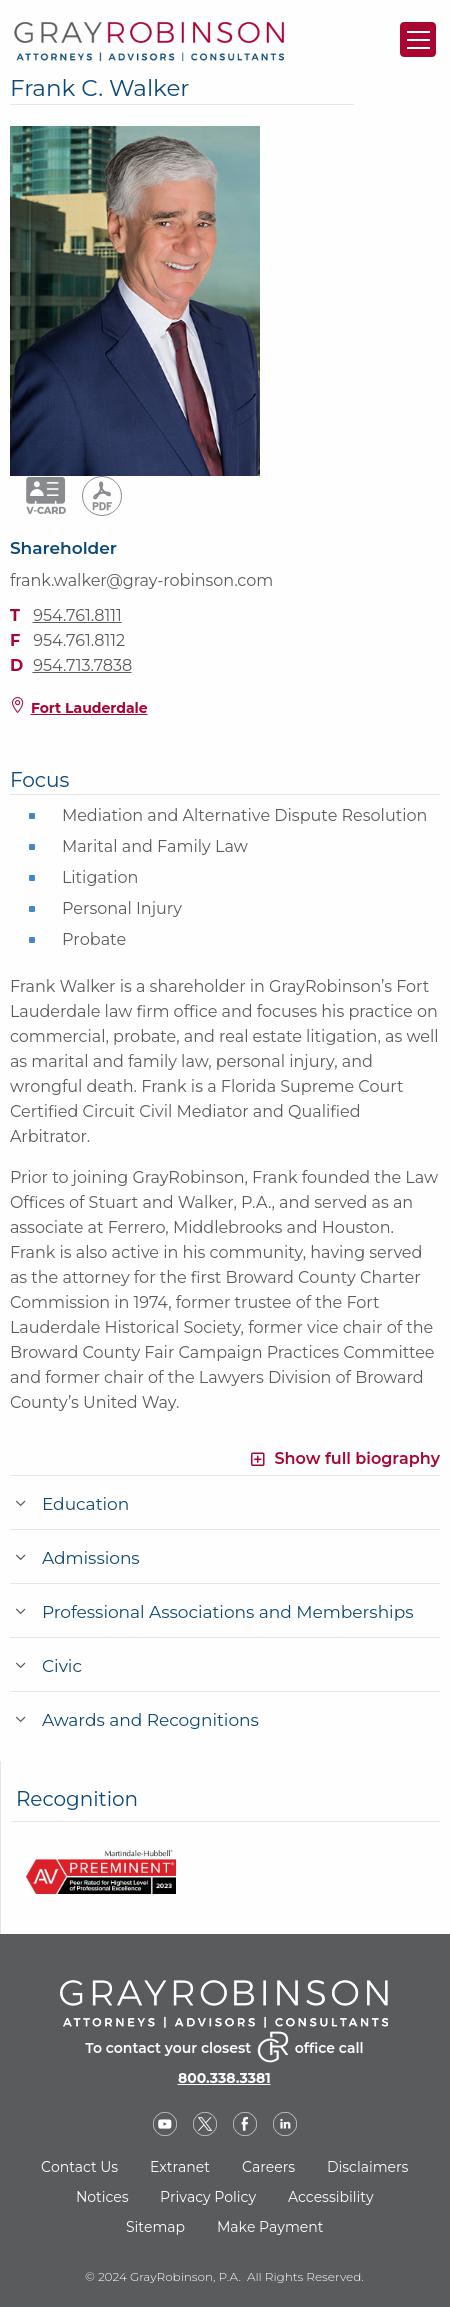 Frank C. Walker Attorney at Law - Fort Lauderdale FL Lawyers